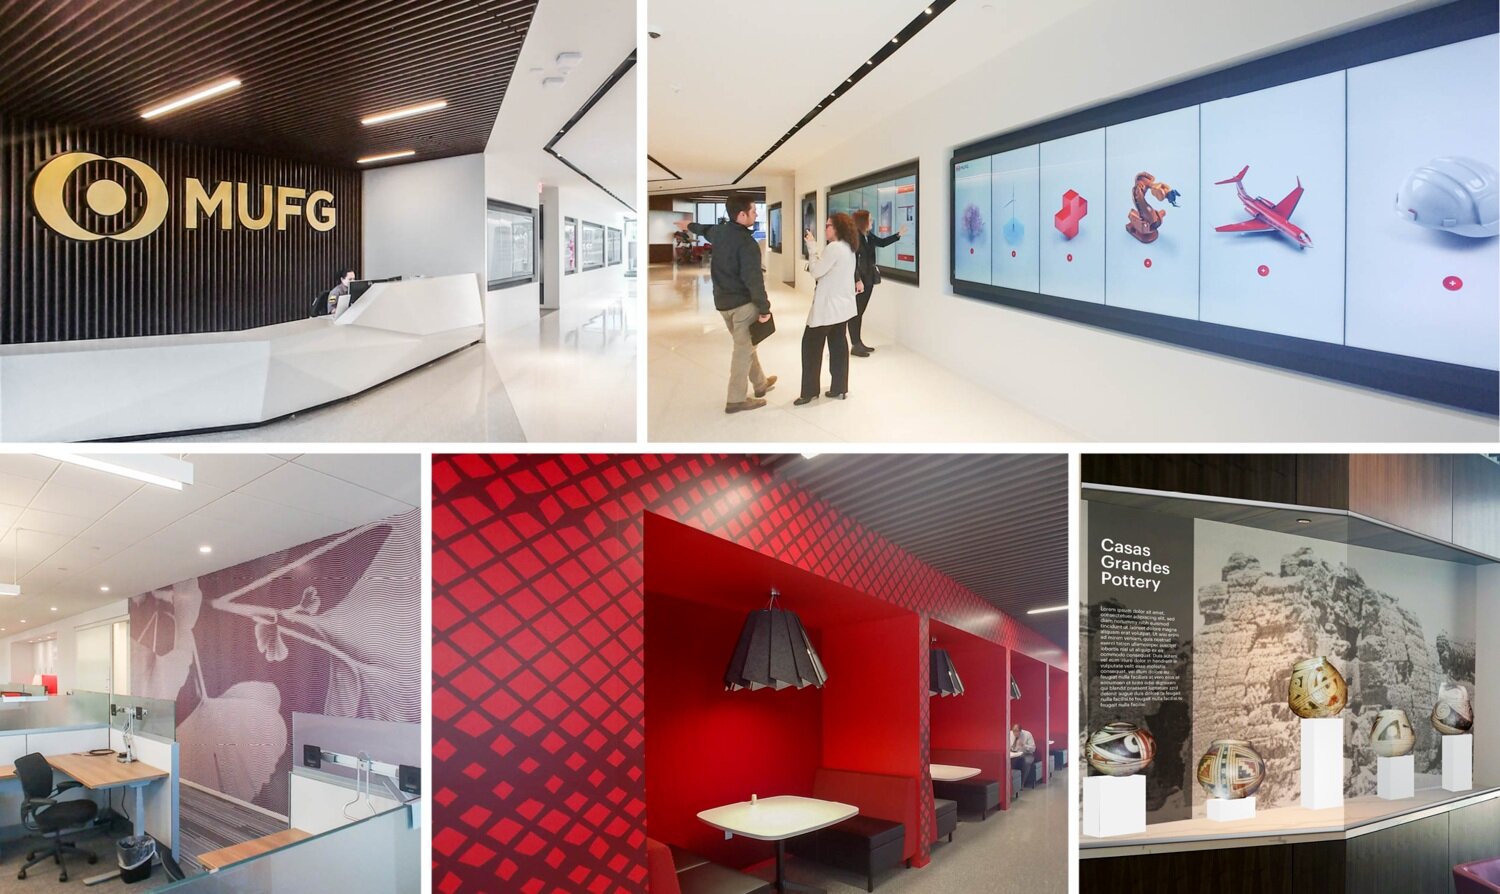 MUFG. This financial company’s Japanese heritage, along with the surrounding Phoenix landscape, were used to bring the company’s story to life when designing their new U.S. hub.